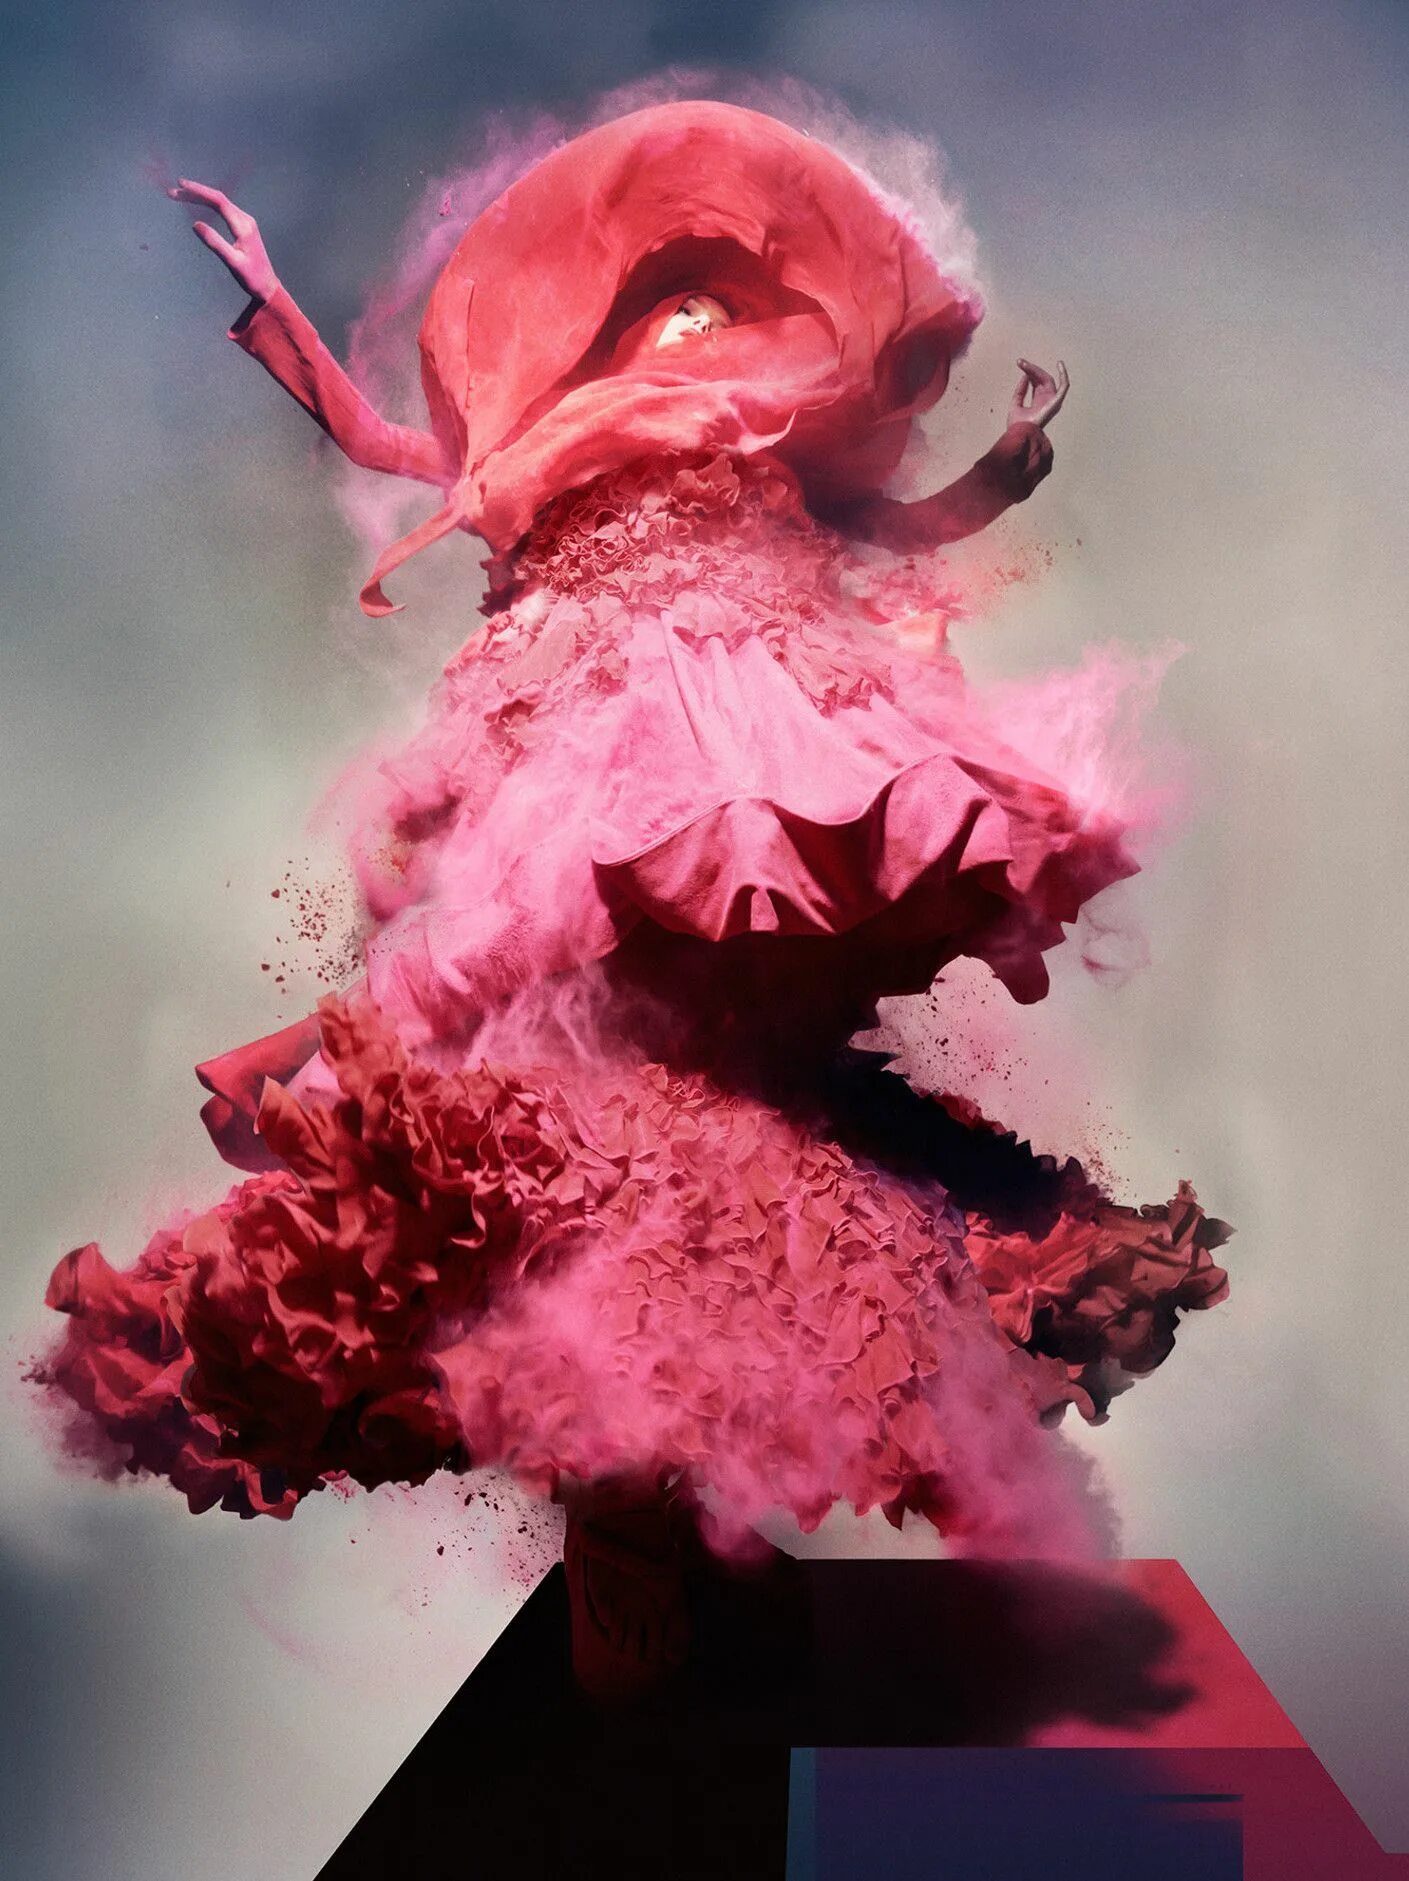 Nick Knight. Nick Knight фотограф. Pink: the History of a Punk, pretty, powerful Color. Ник Найт фотограф работы.